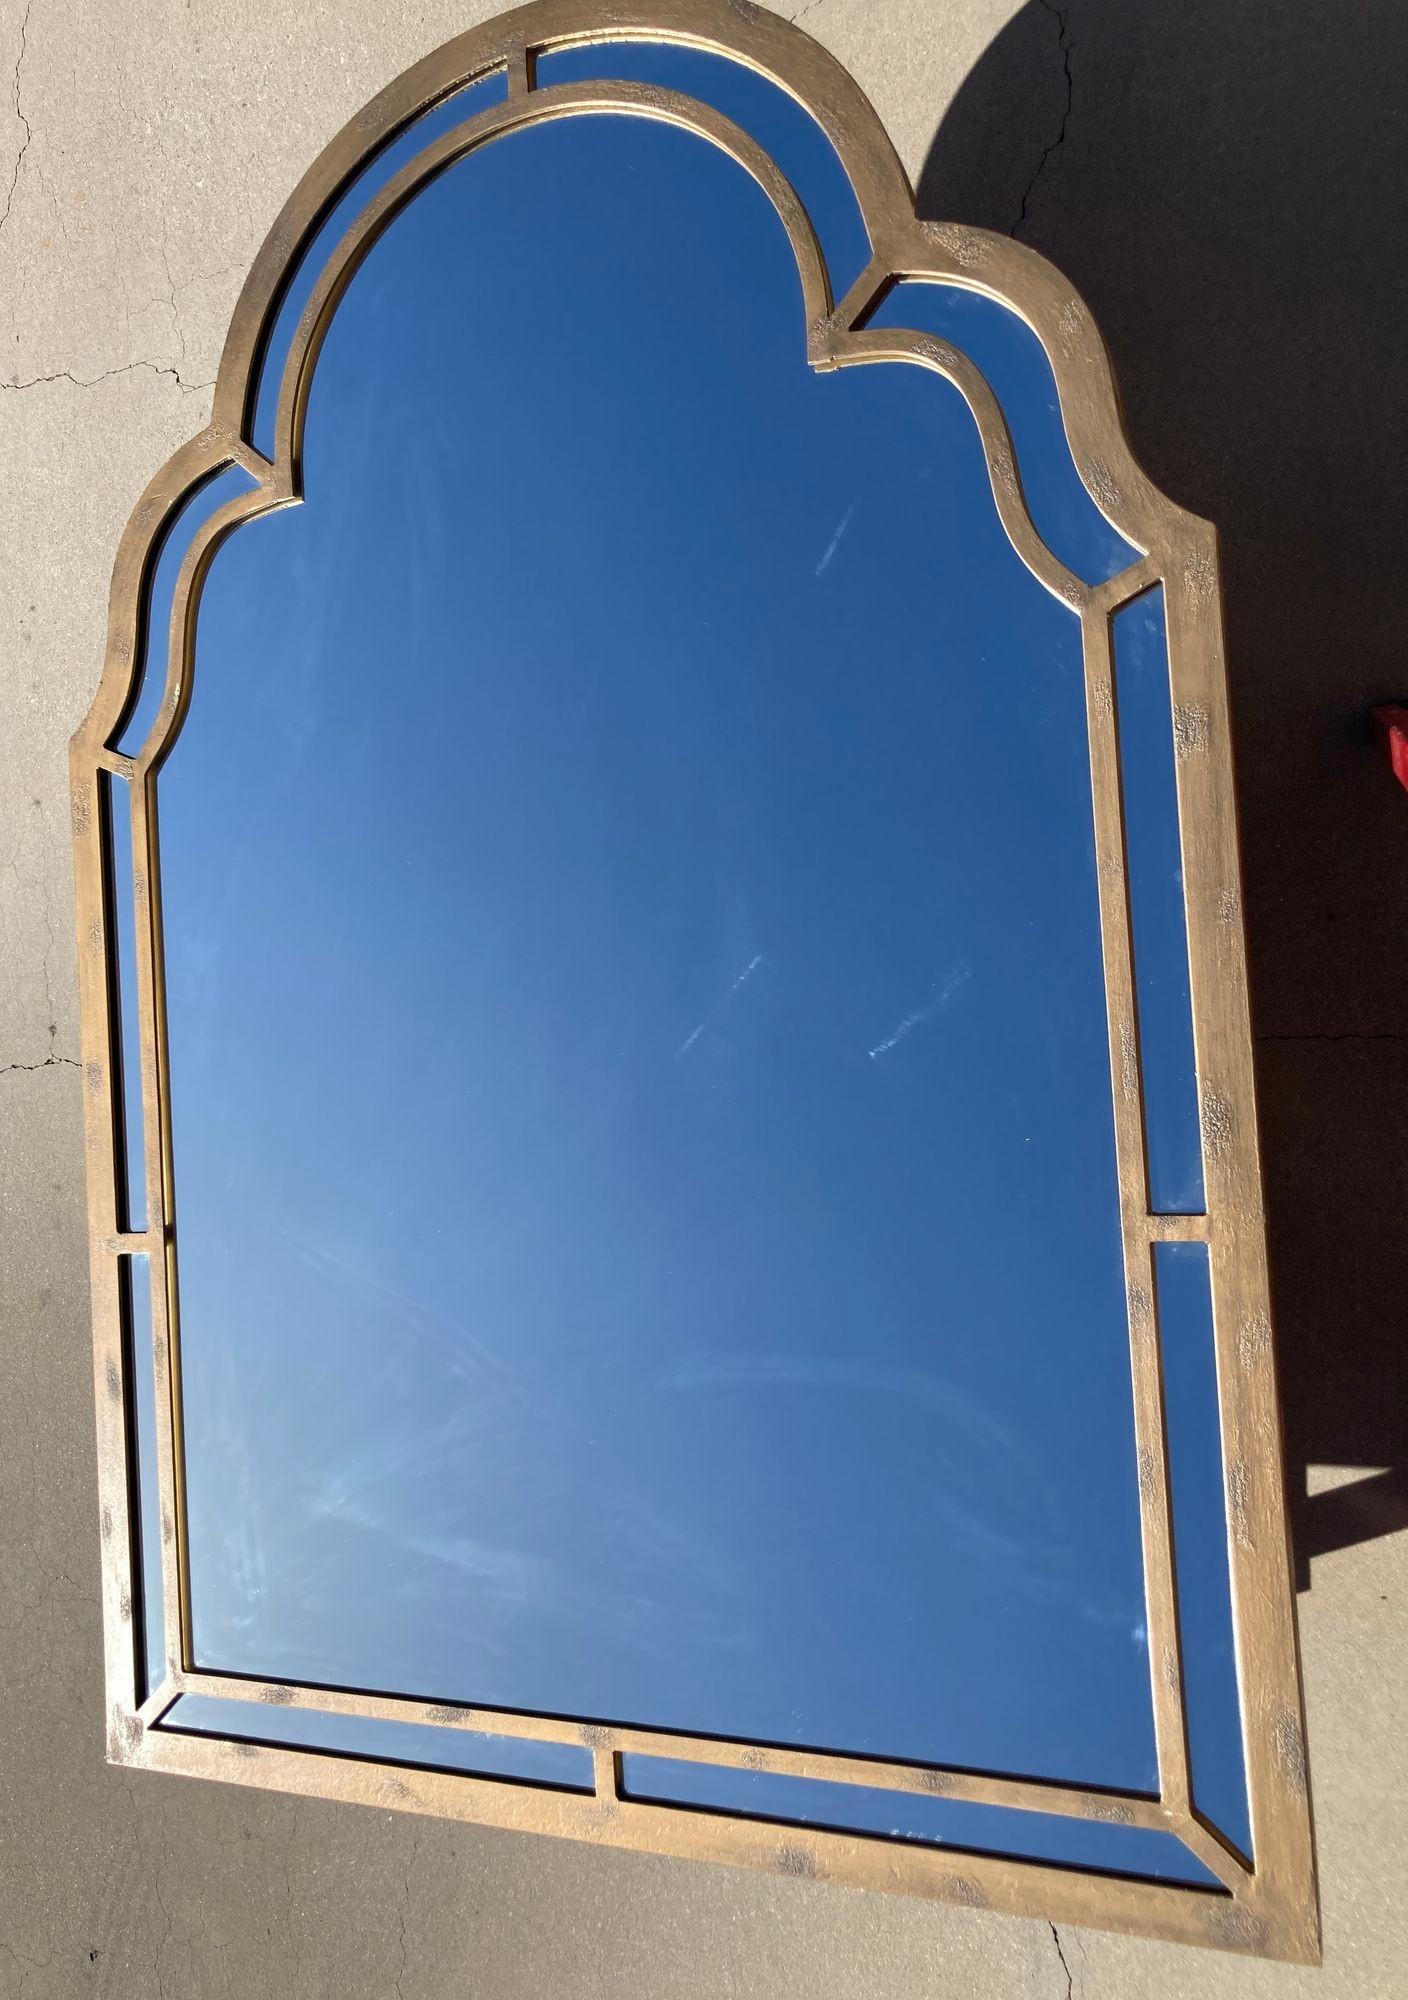 Hand-crafted Large Forged Wrought Iron Floor Mirror 6ft 8 In Good Condition For Sale In North Hollywood, CA